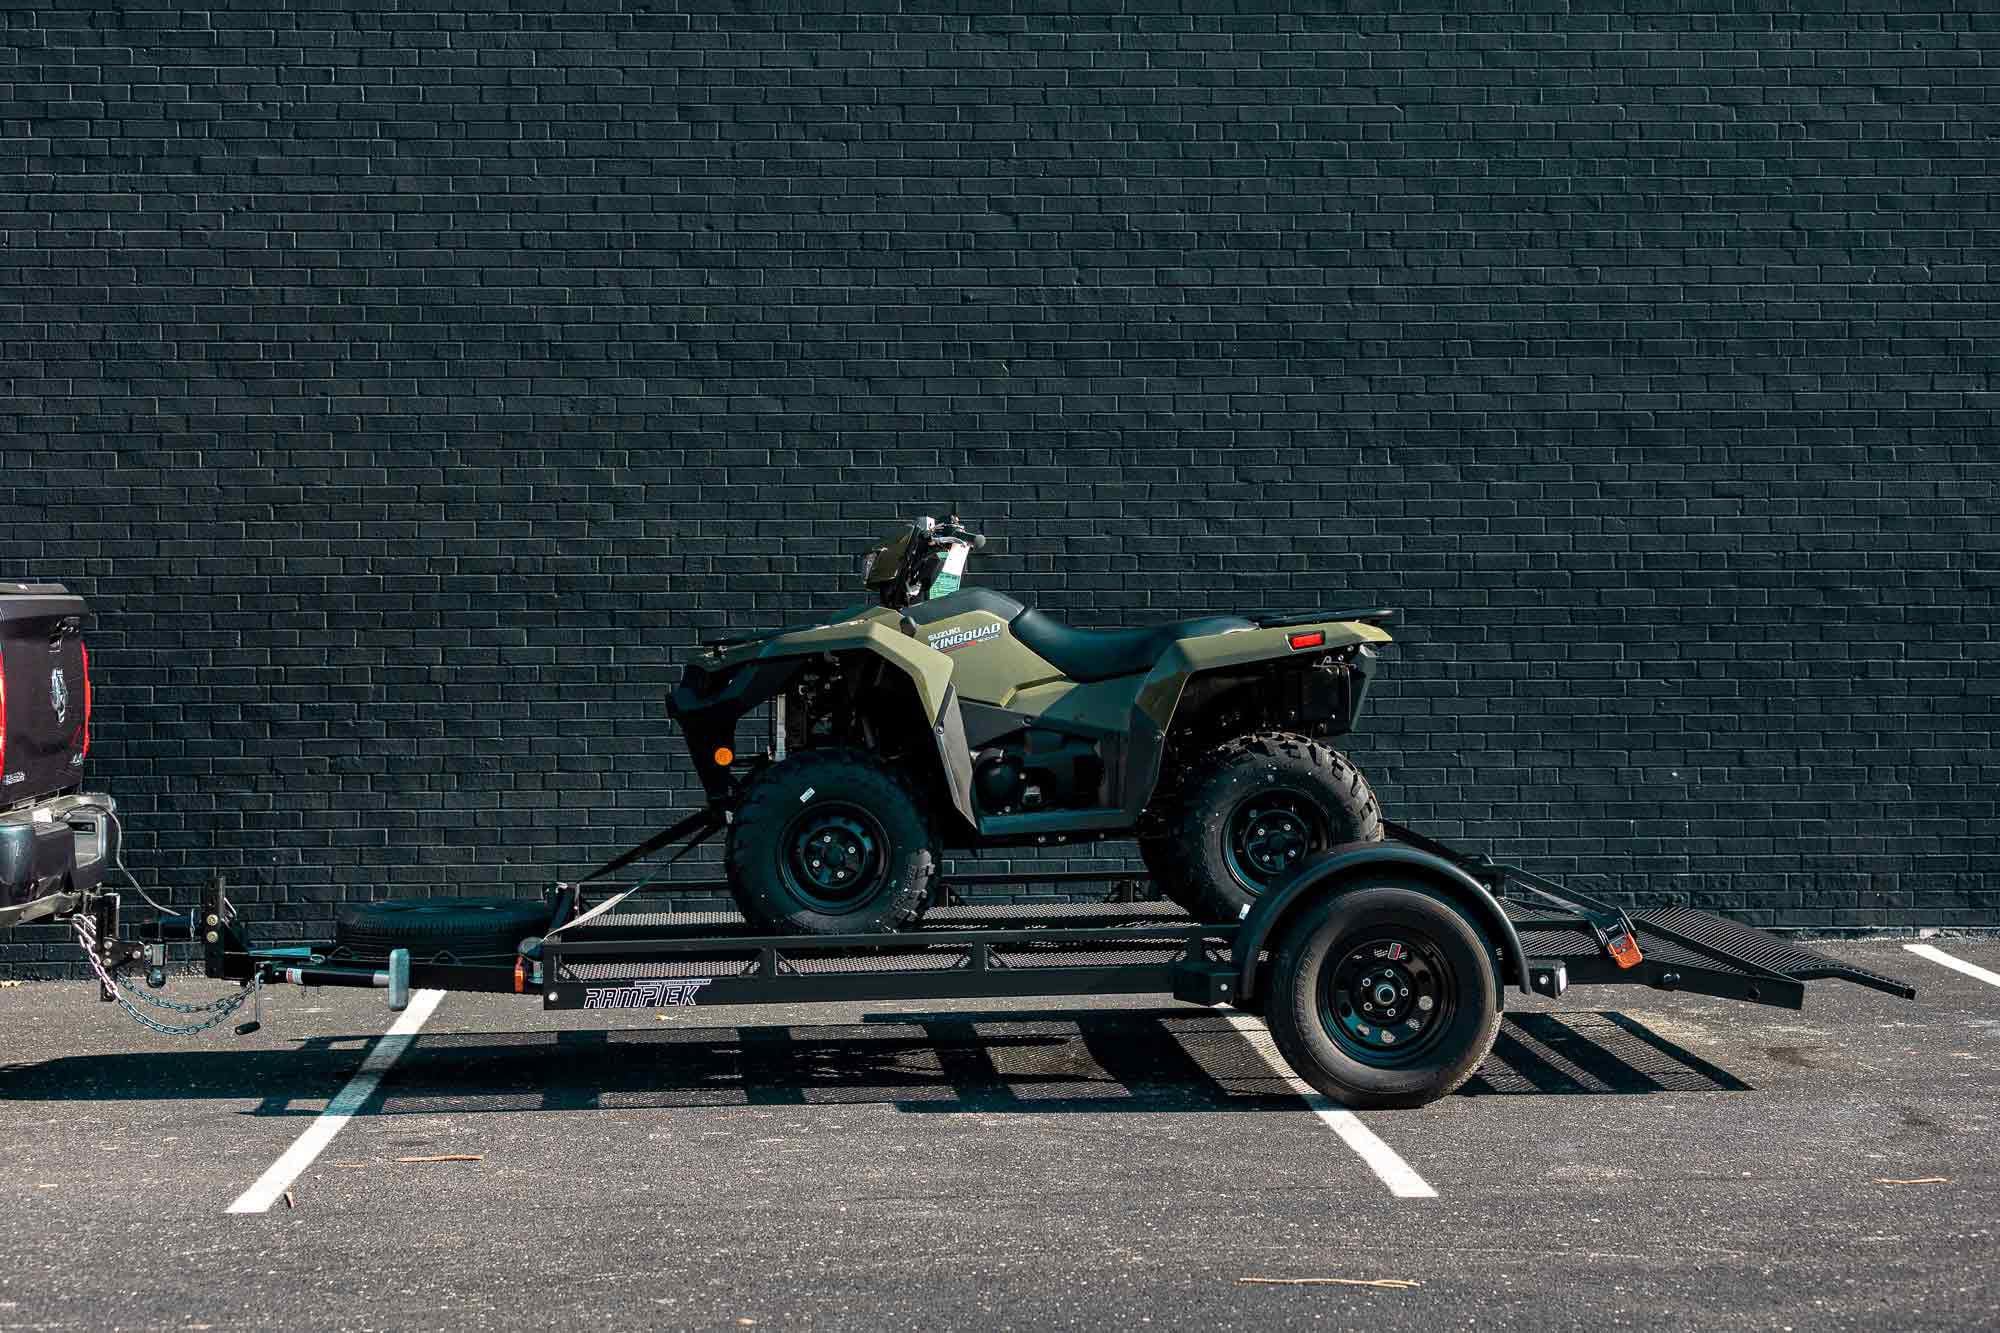 The Ramptek trailer is a premium solution for ATV and UTV owners looking to tow their rigs.